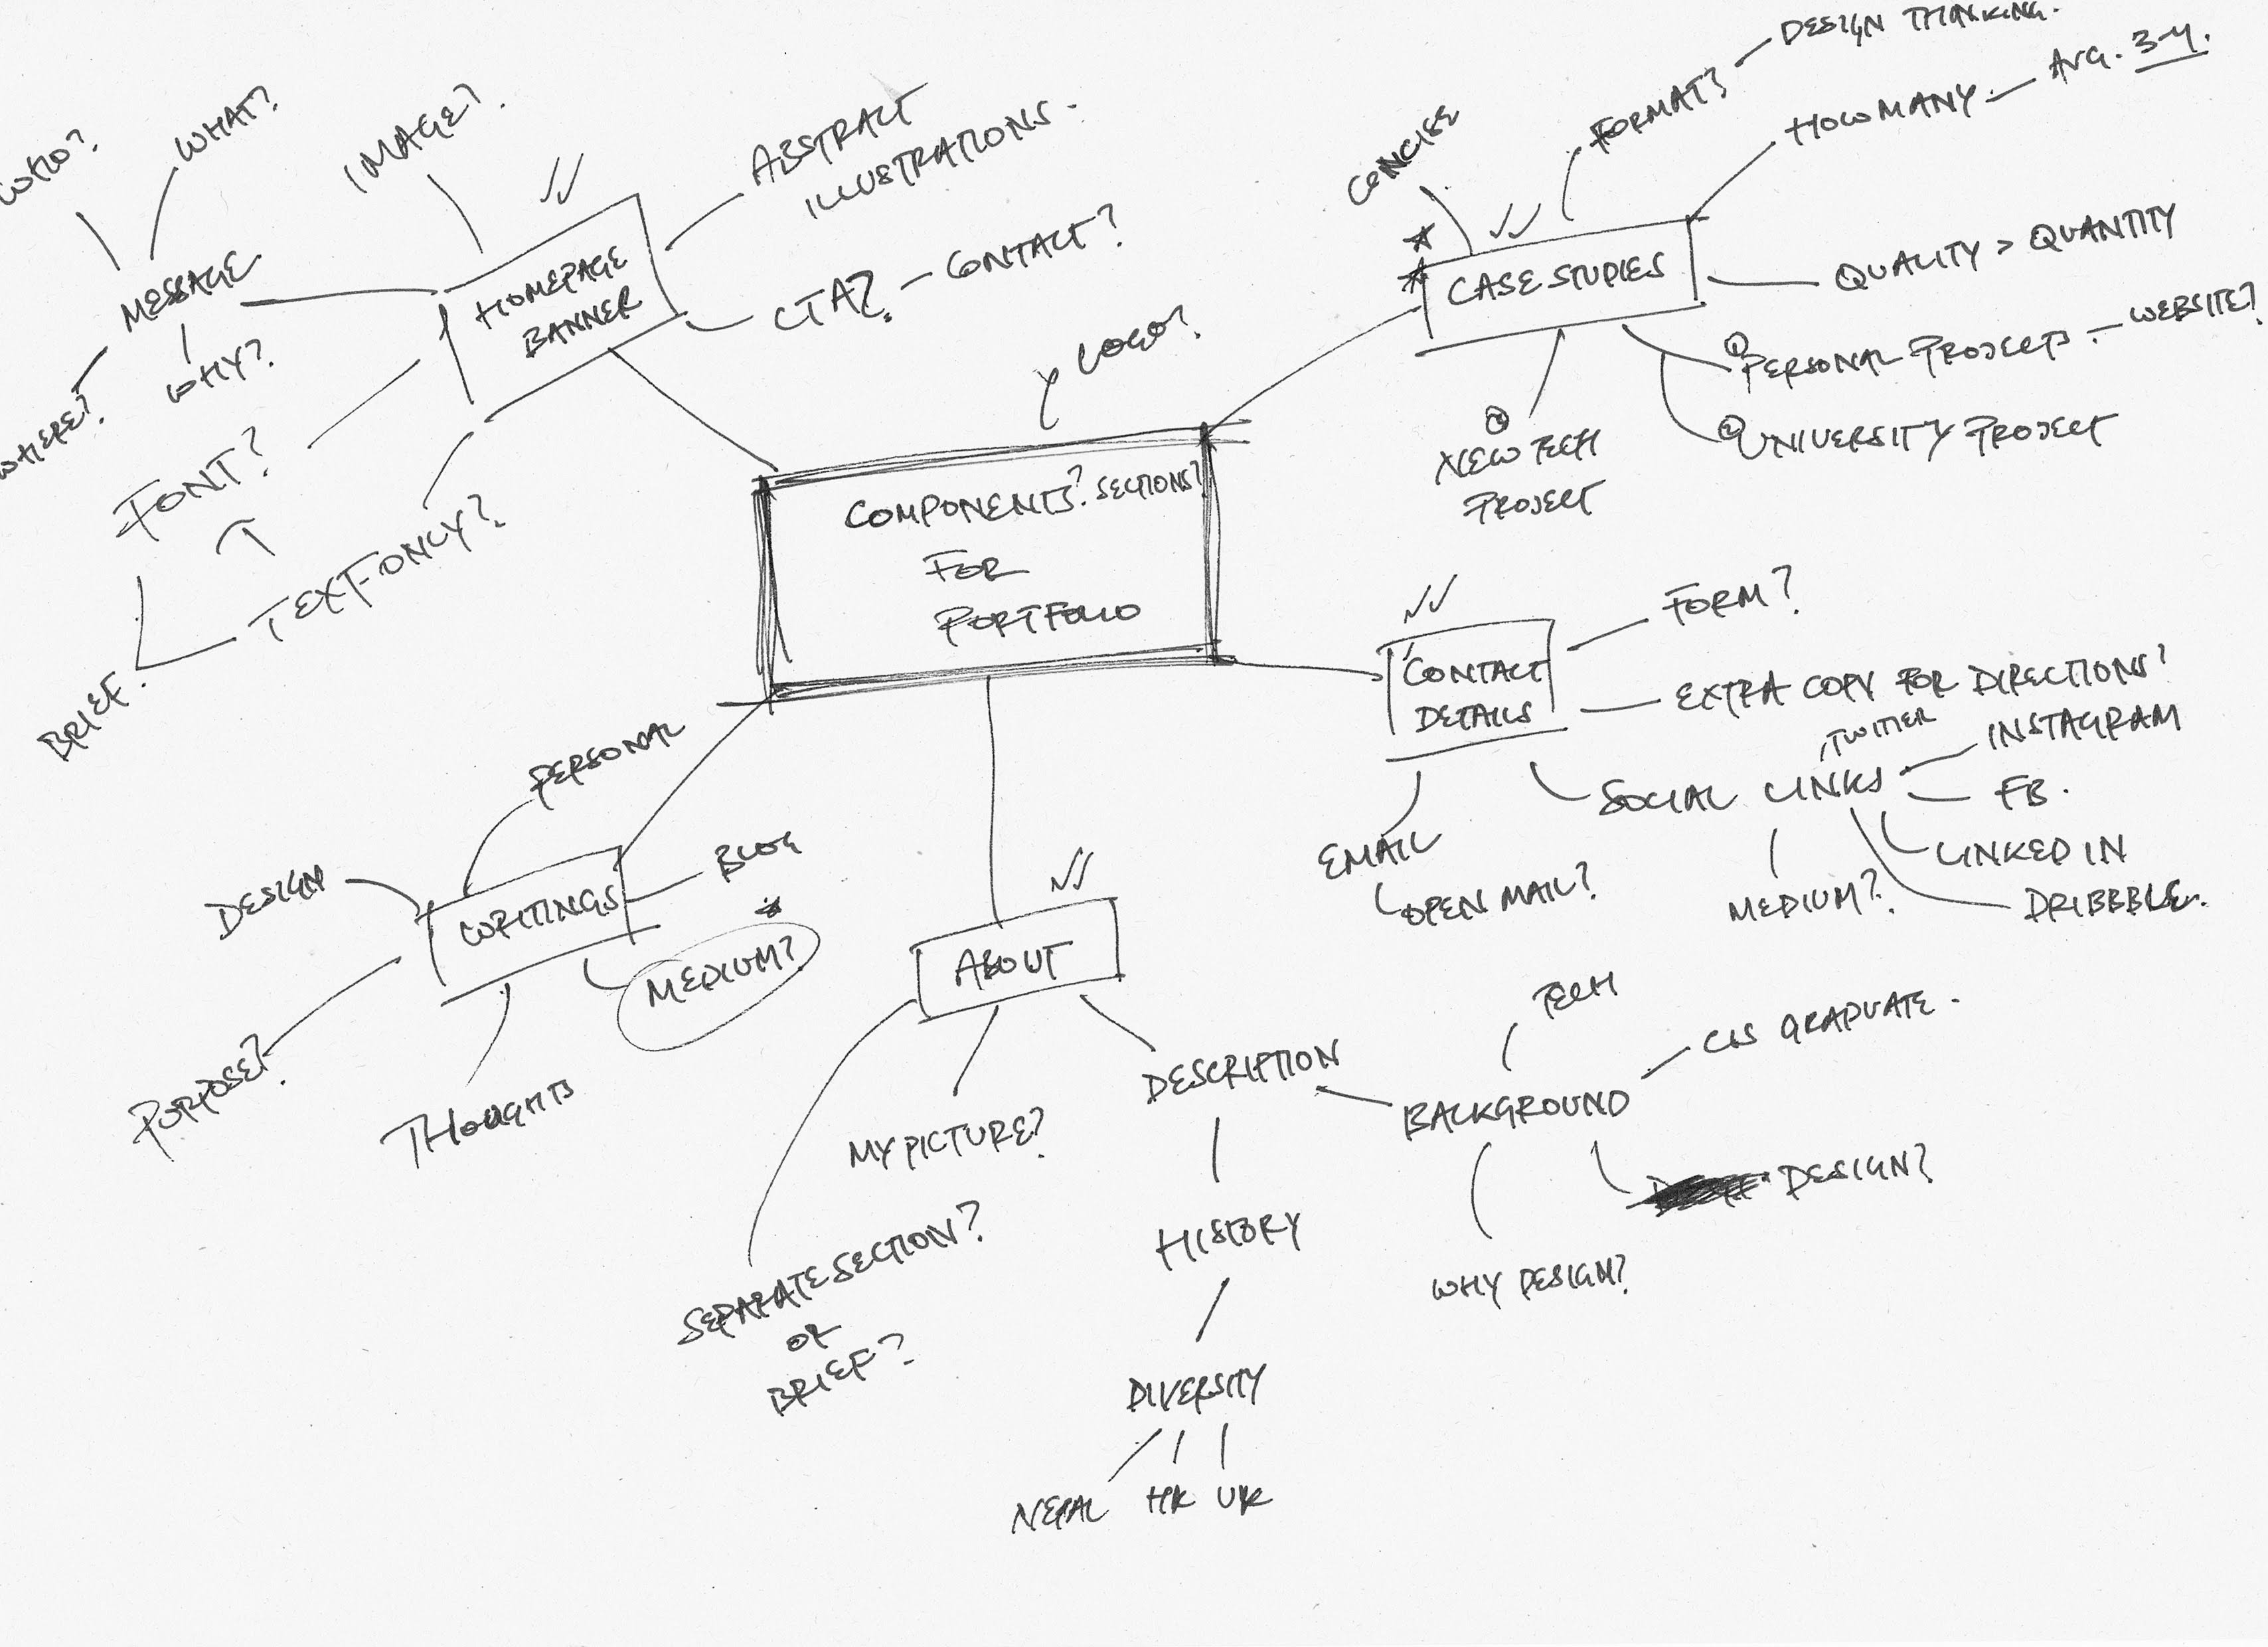 Mindmap of sections and content for the portfolio website. There are five main 
                            branches - homepage banner, writings, about, contact details, and case studies. Each subbranch then lists various
                            components for individual section.